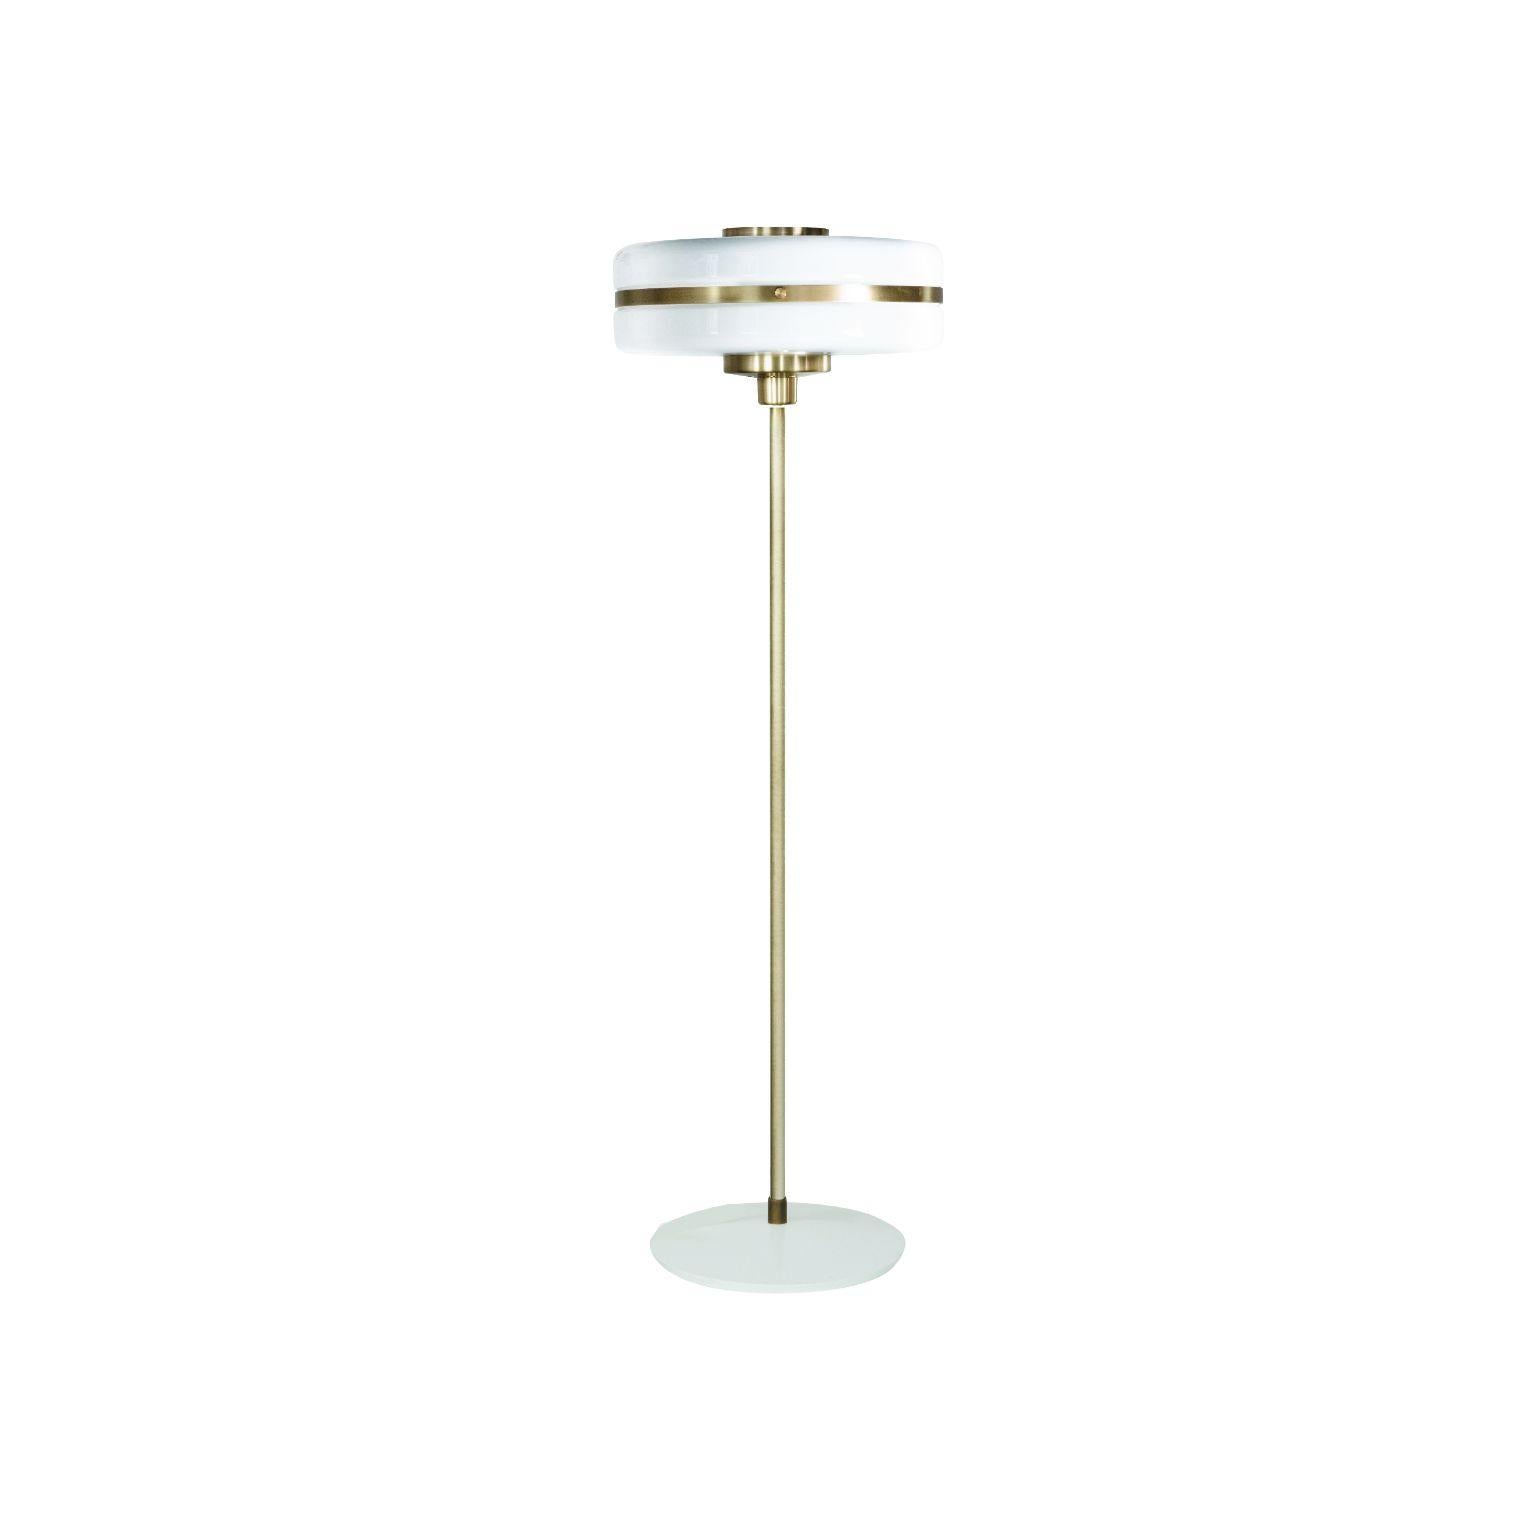 Masina floor lamp by Bert Frank
Dimensions: 135 x 40 x 22 cm
Materials: Brass, glass

When Adam Yeats and Robbie Llewellyn founded Bert Frank in 2013 it was a meeting of minds and the start of a collaborative creative partnership with engineering at